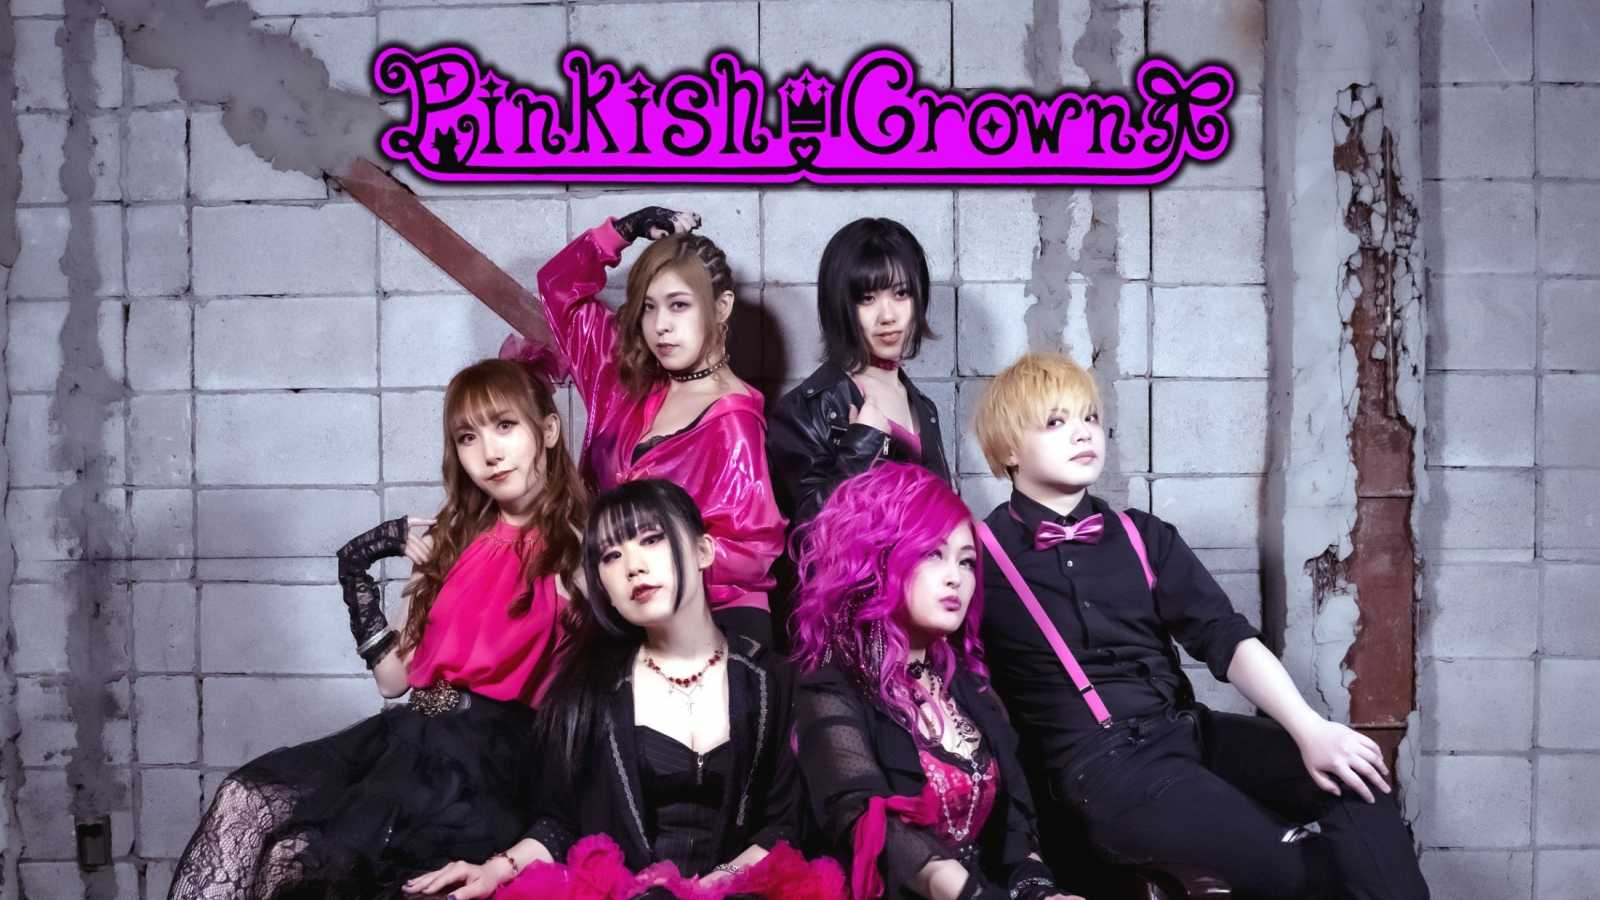 Nowy album Pinkish Crown © Pinkish Crown. All Rights Reserved.